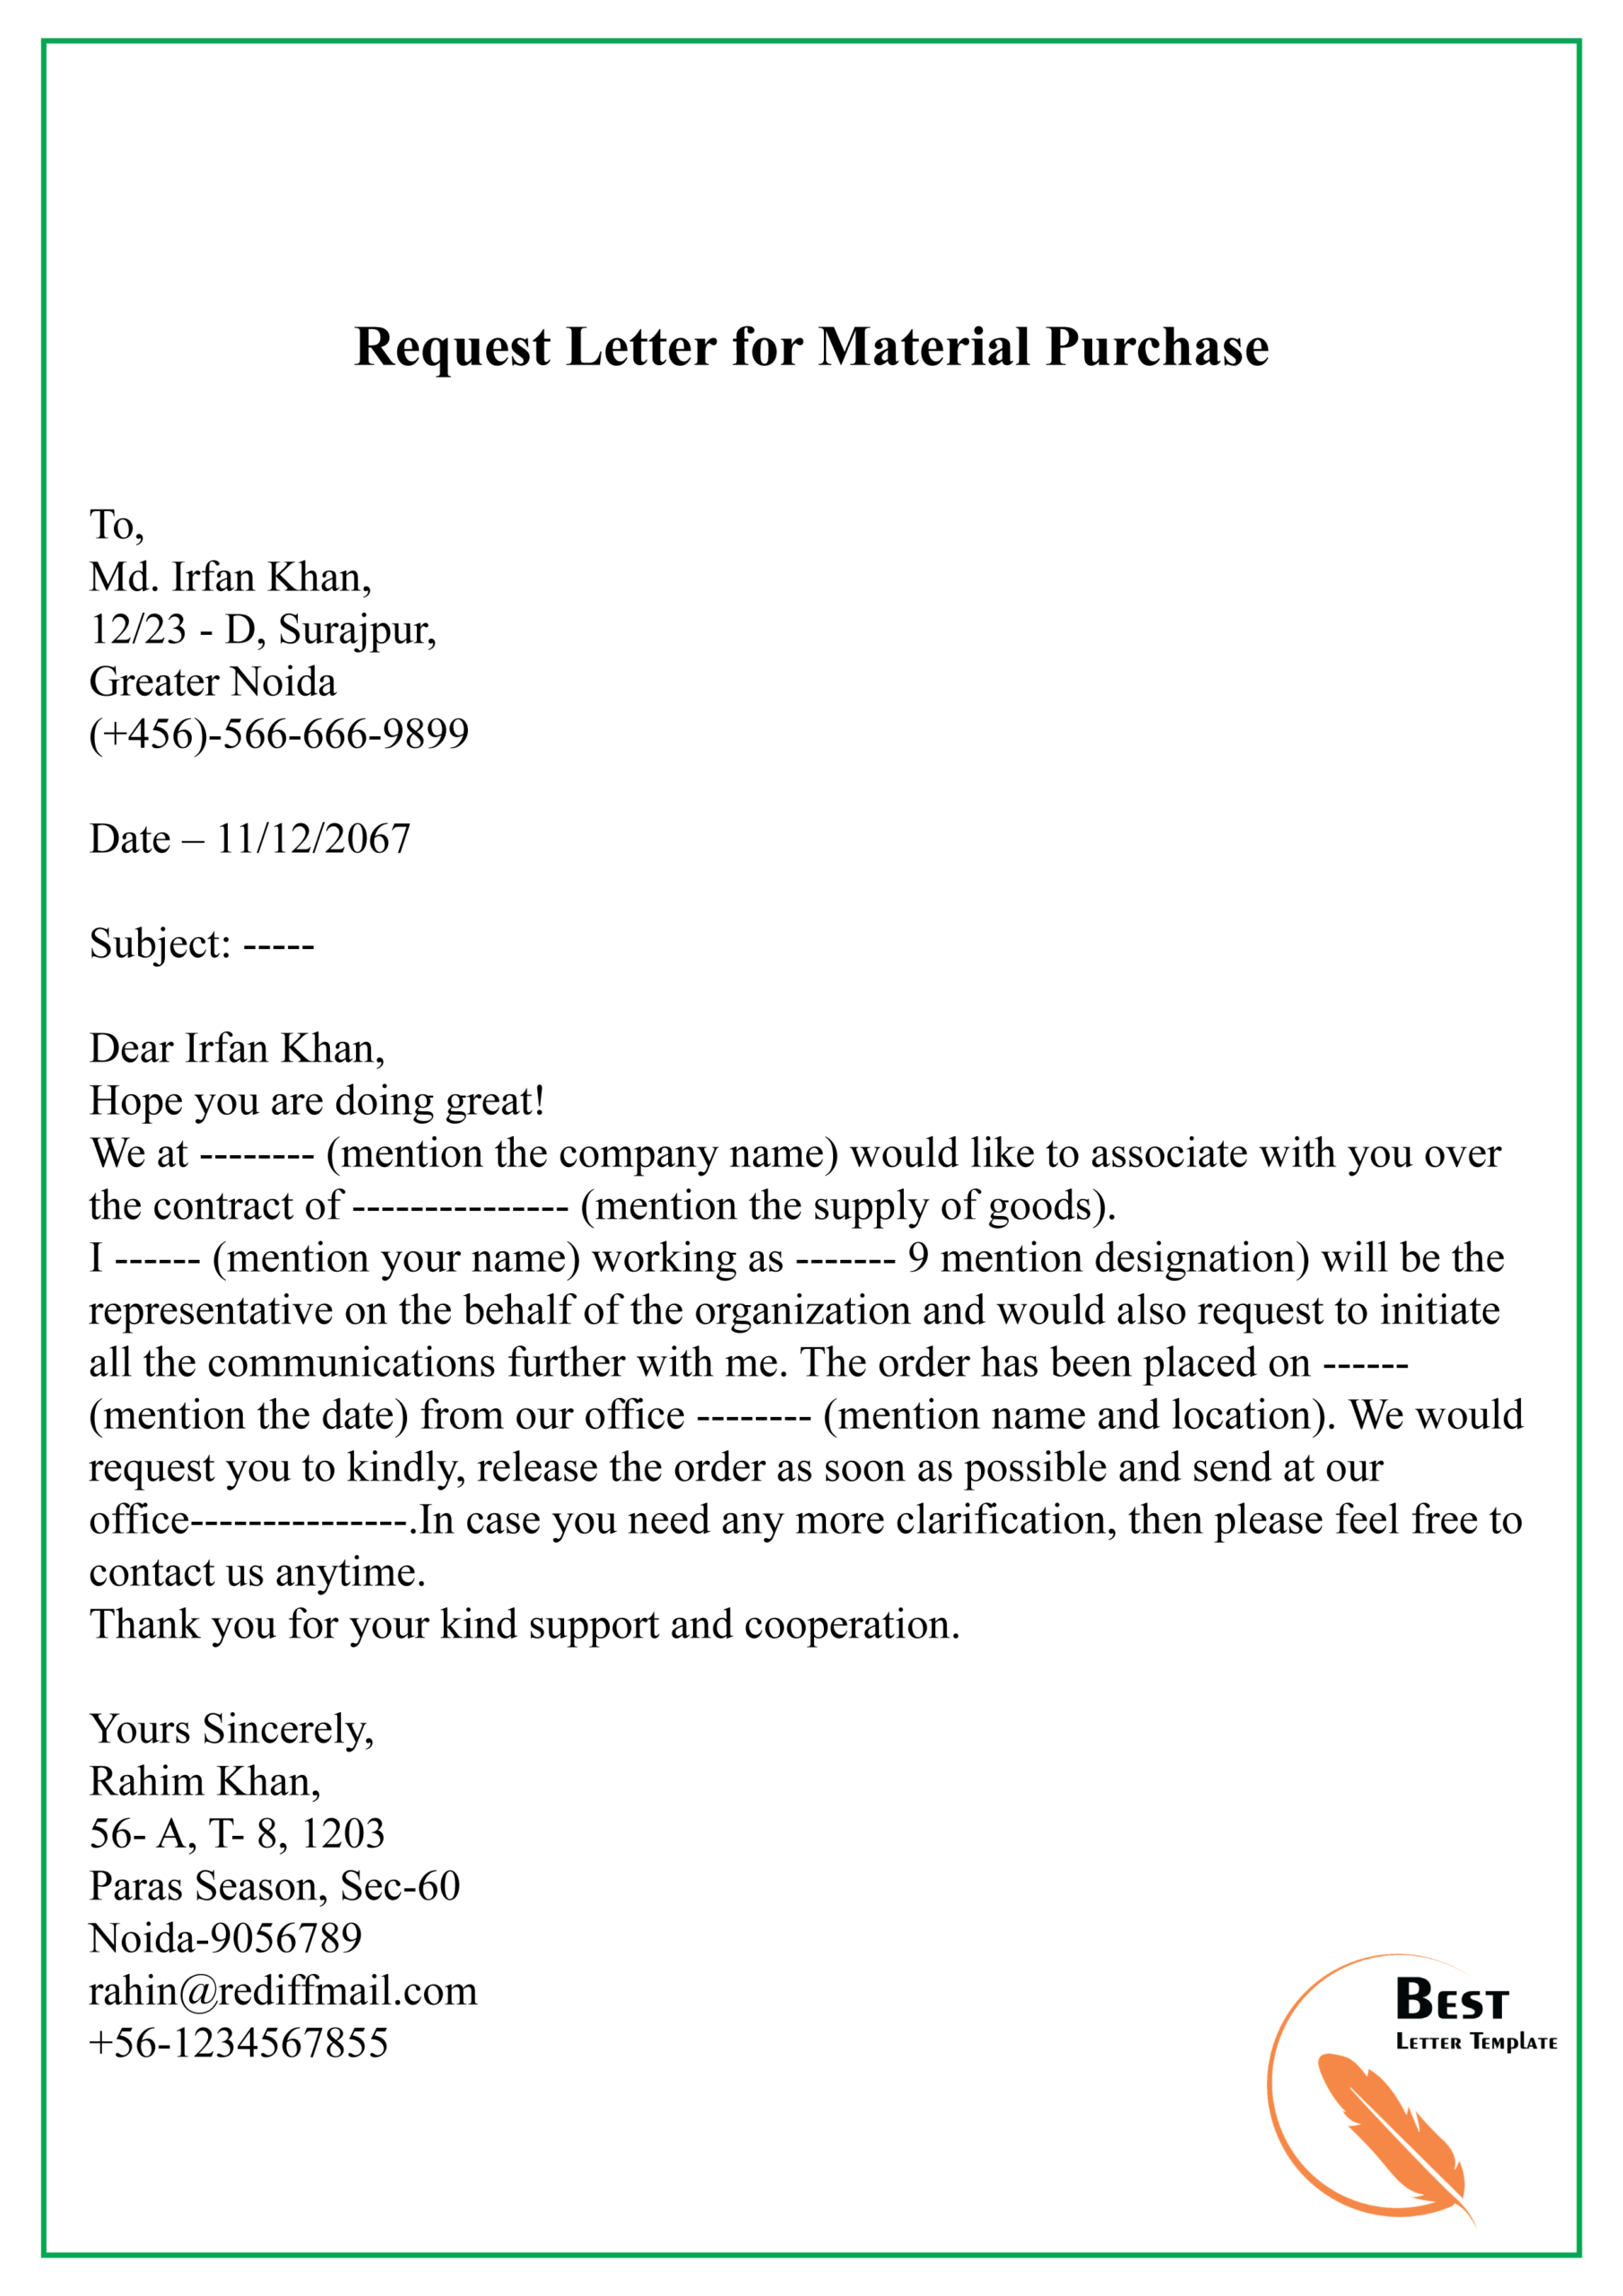 Request Letter For Material Purchase 01 | Best Letter Template Throughout Material Letters Template